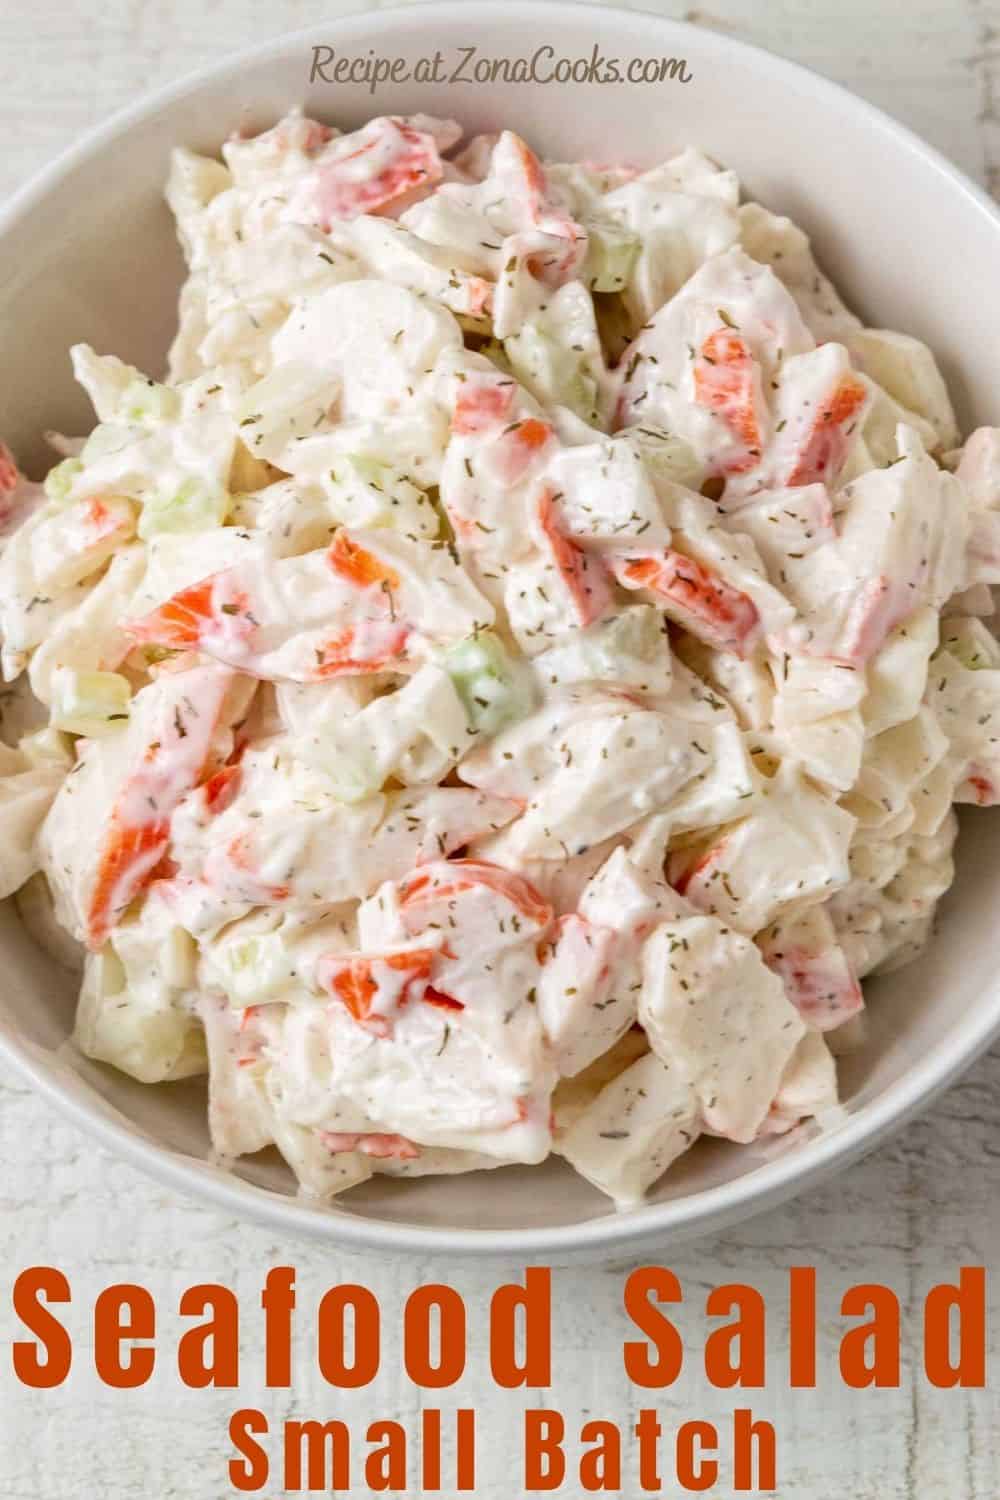 a bowl of seafood salad with chopped imitation crab meat combined with onion and celery in a creamy mayonnaise dressing and text reading recipe at zonacooks.com seafood salad small batch.